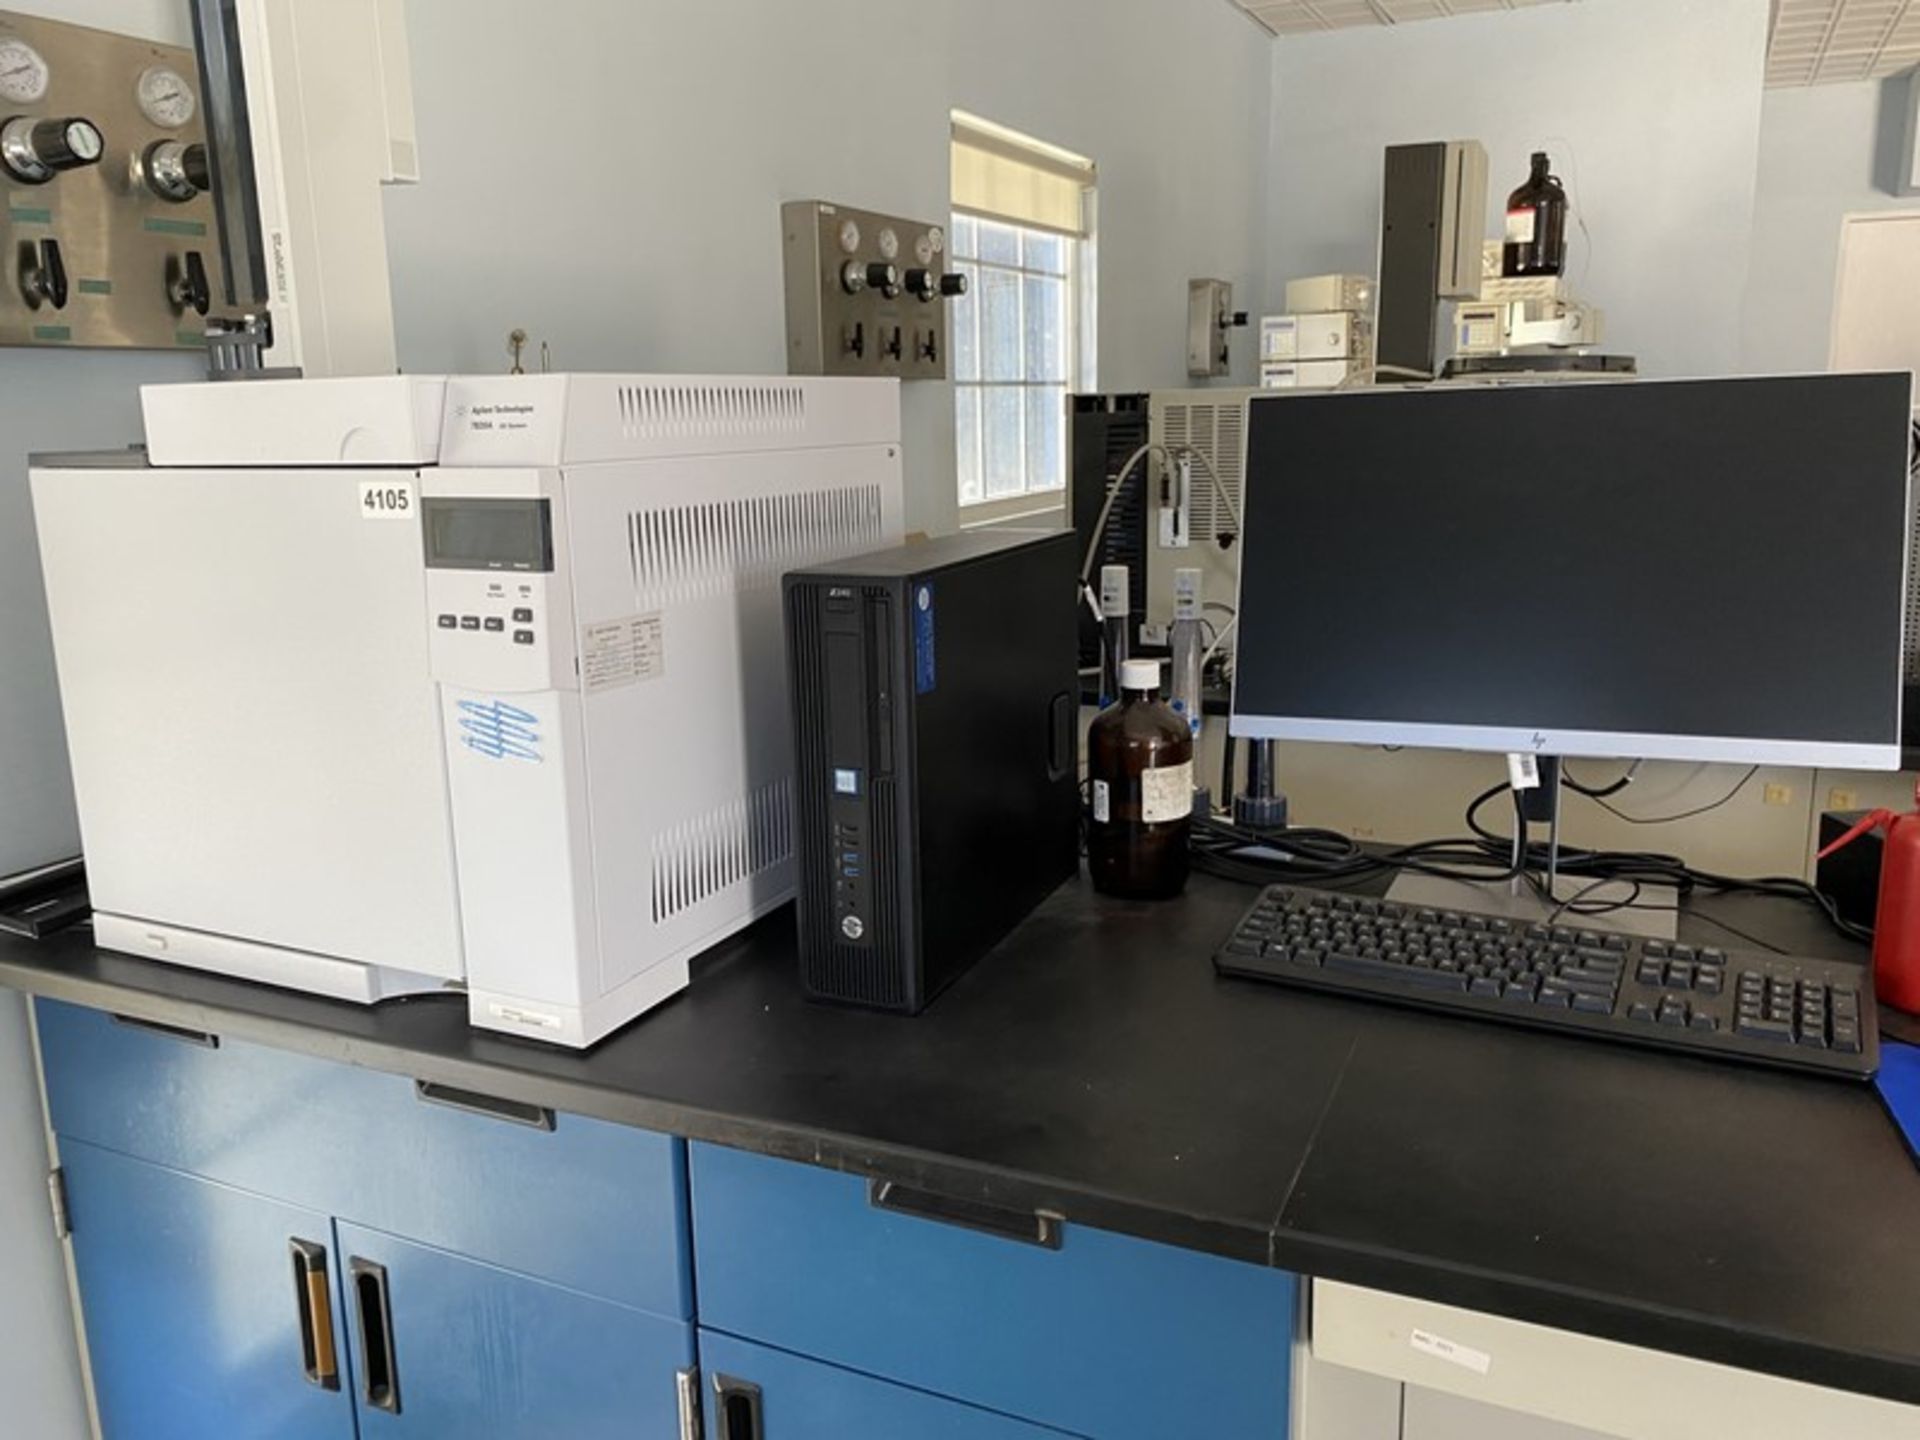 Agilent Technologies 7820A Gas Chromatograph System with autosampler. SN. CN18162009, Mdl. G4350A.